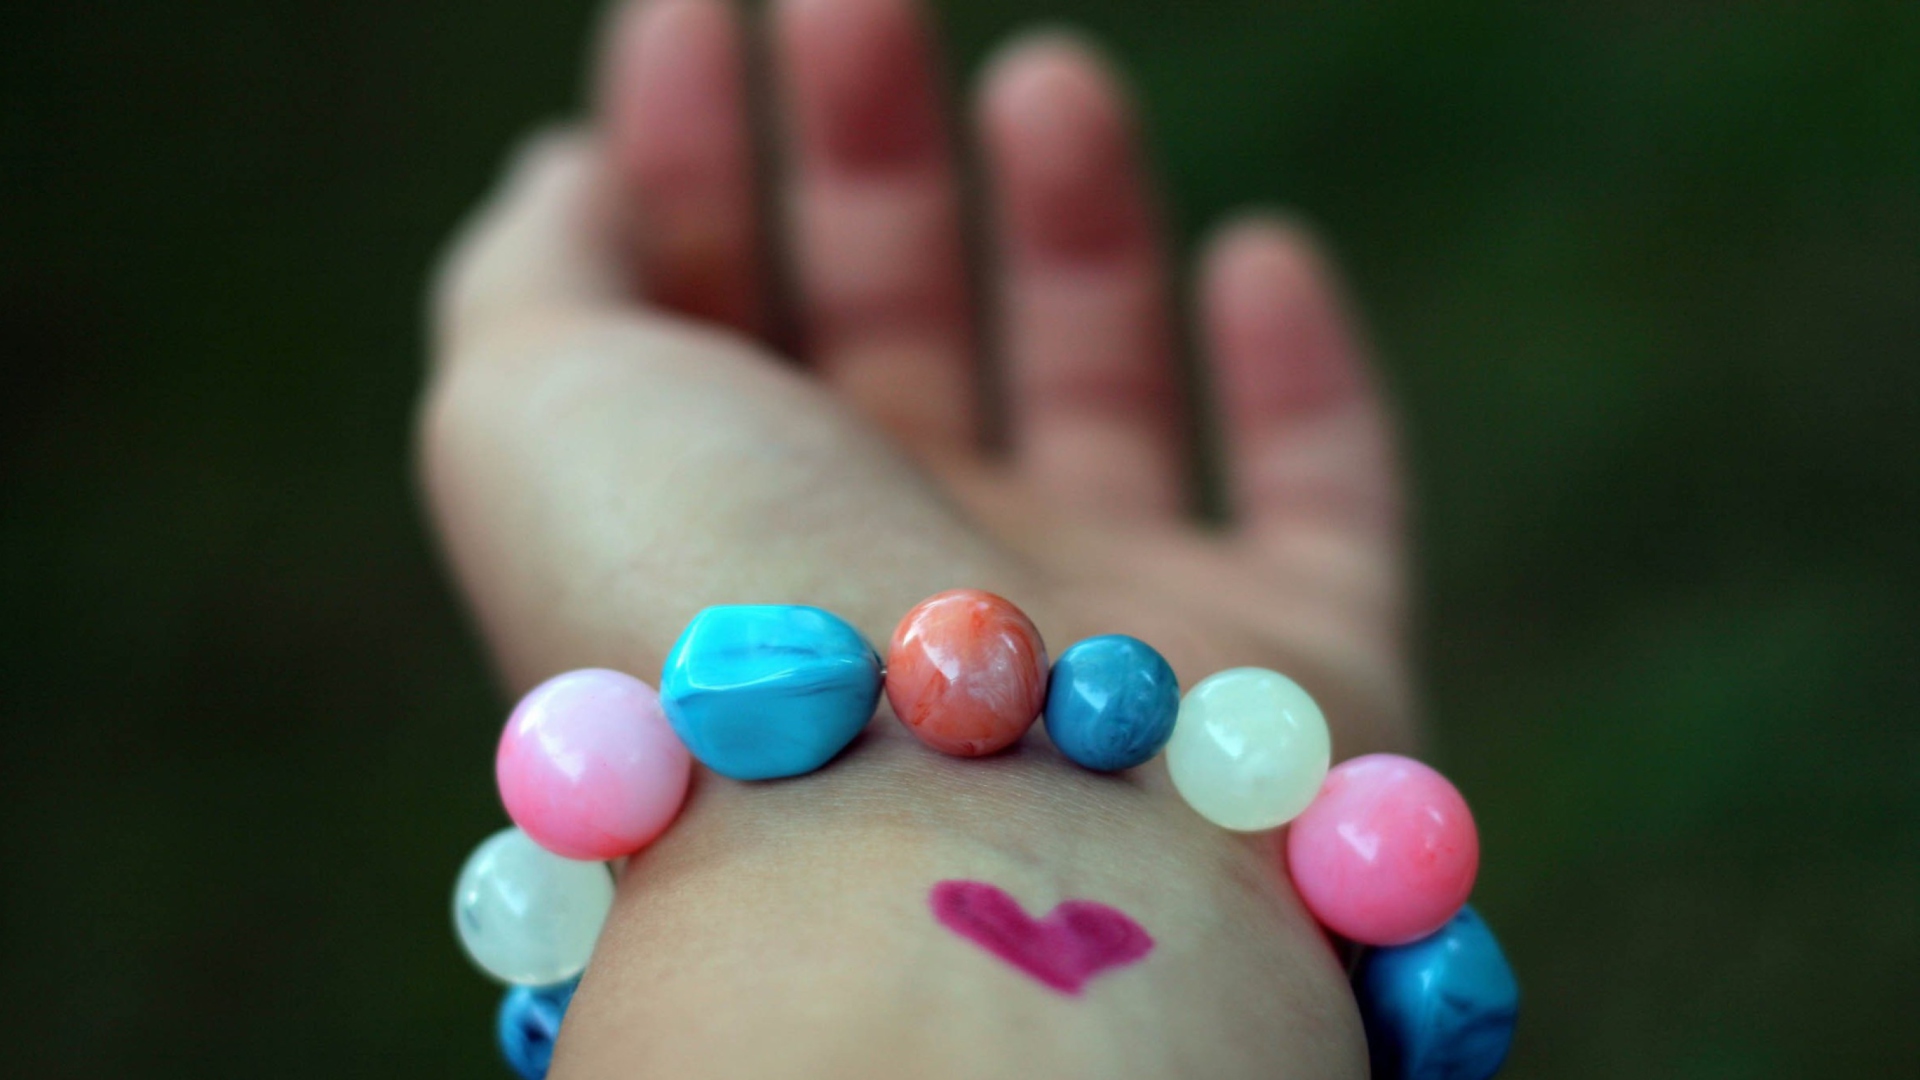 Heart And Colored Marbles Bracelet wallpaper 1920x1080